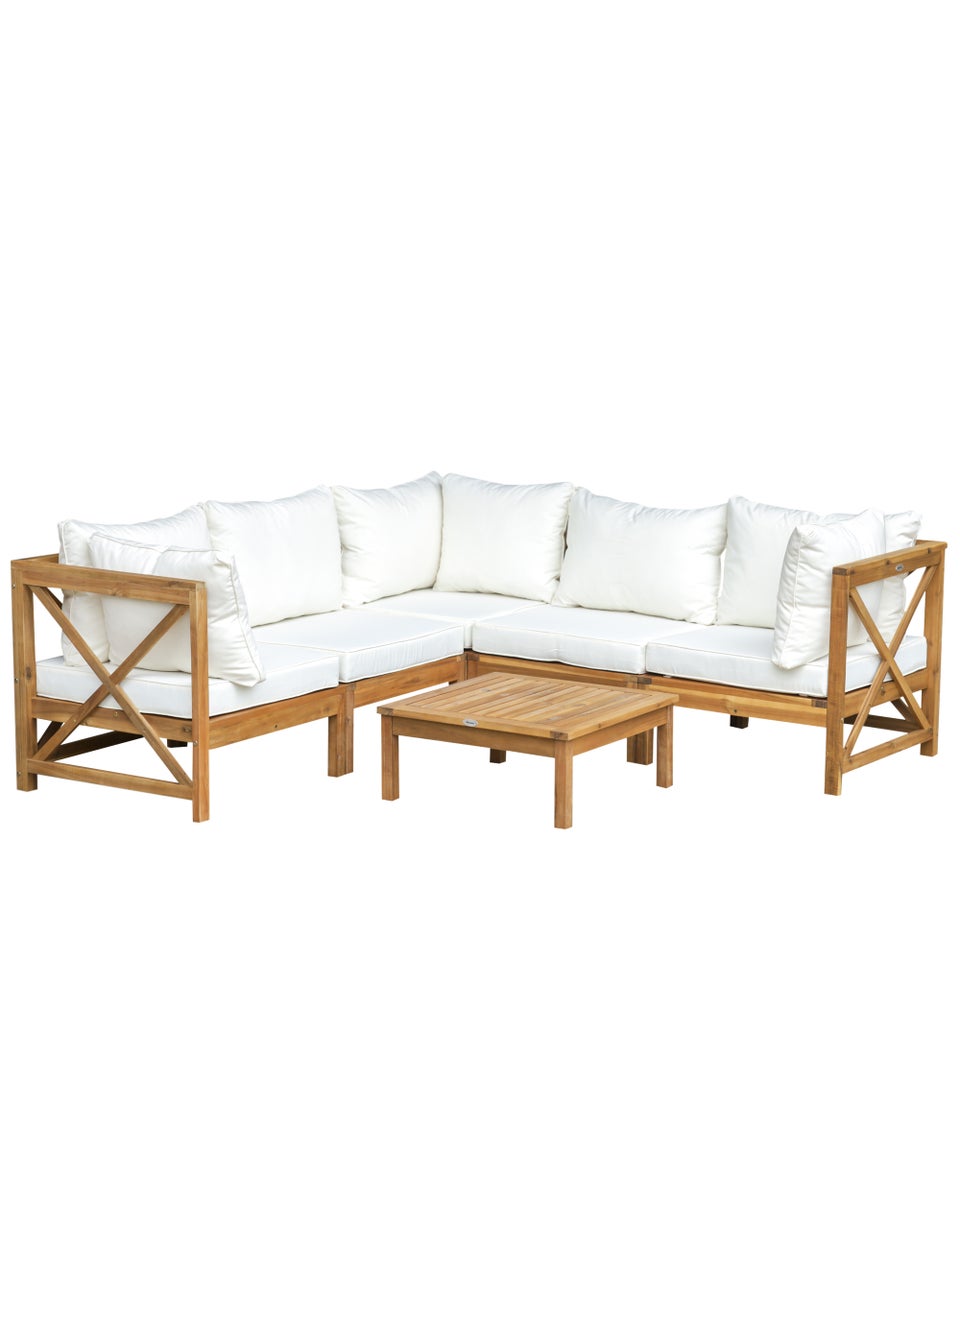 Outsunny 6 Piece Wood Patio Dining Set